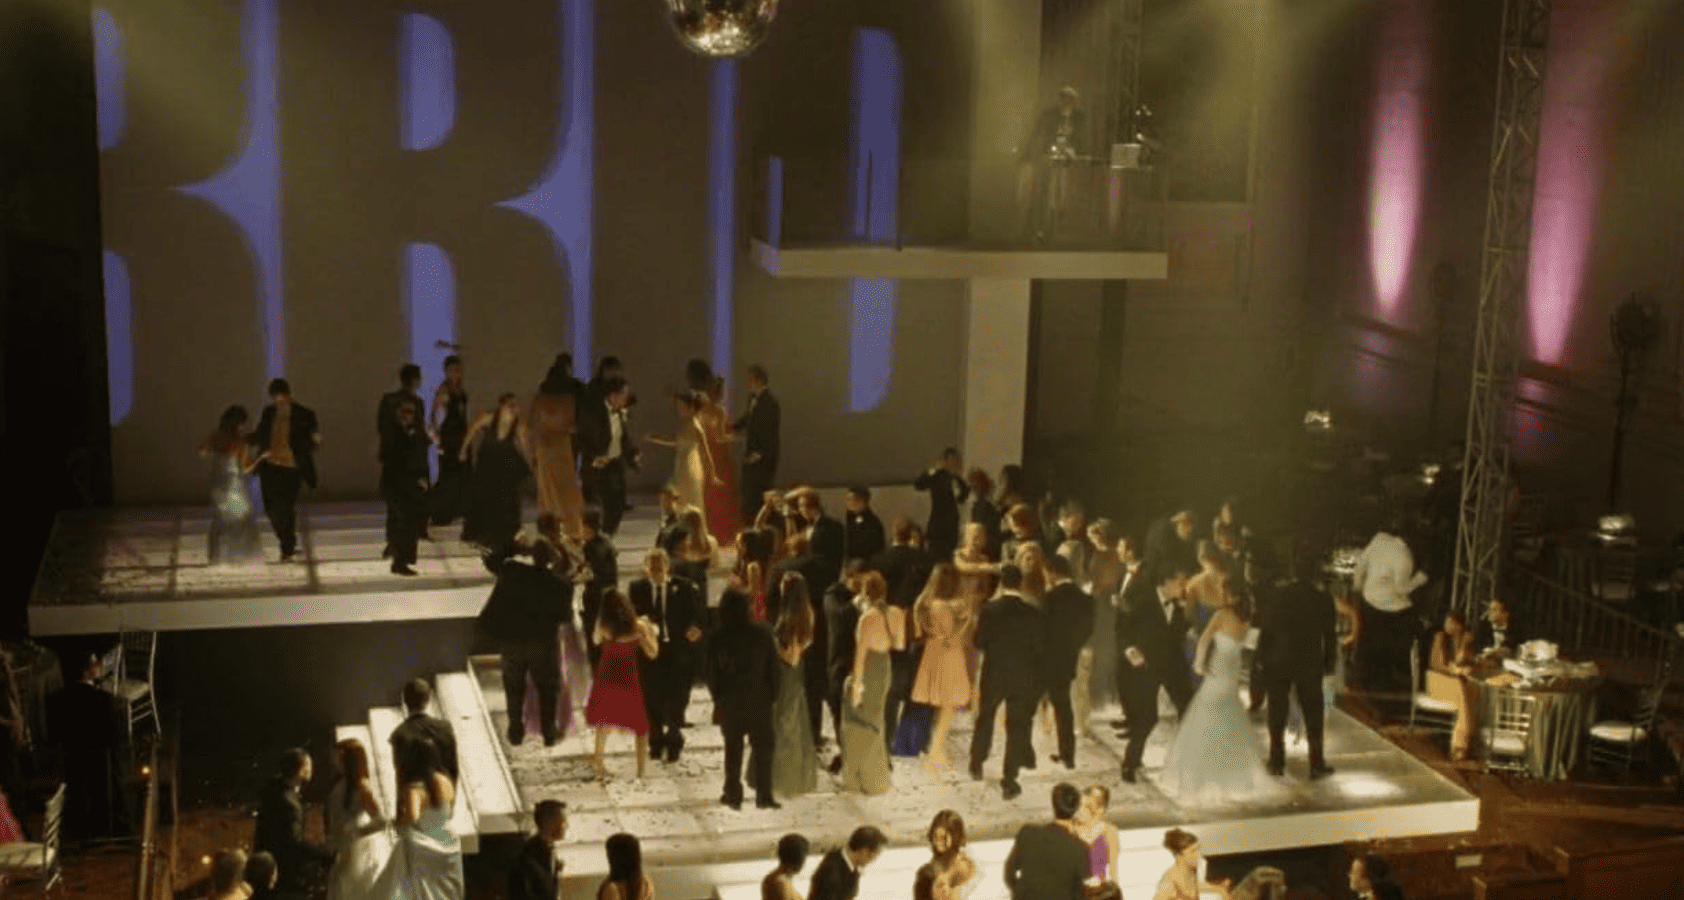 Photograph capturing a dance floor with young people scattered throughout in this image from Screen Gems.